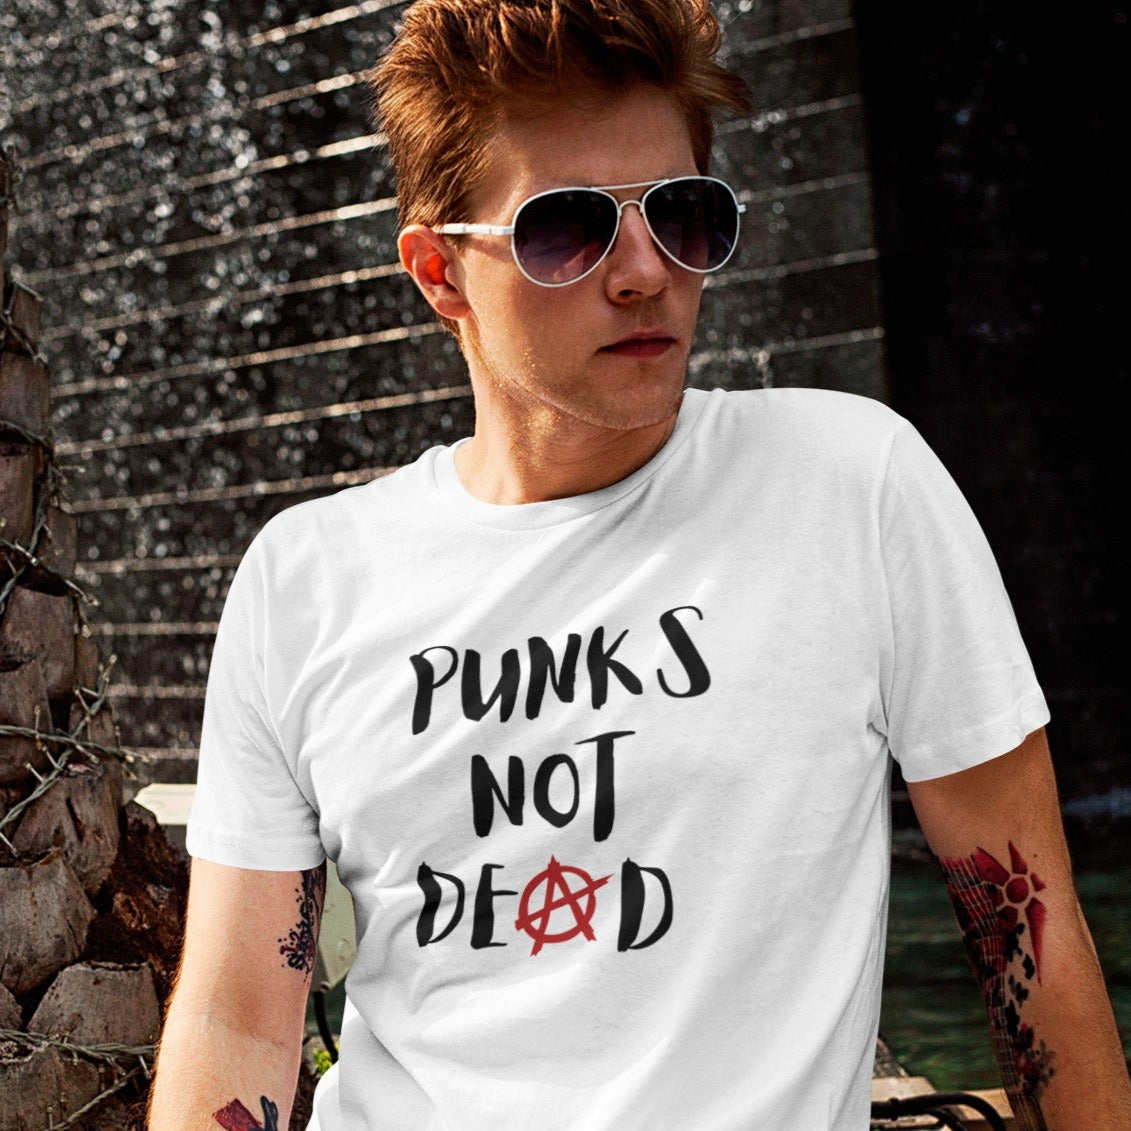 punks-not-dead-anarchy-sign-white-t-shirt-mockup-of-a-red-haired-man-posing-next-to-a-fountain